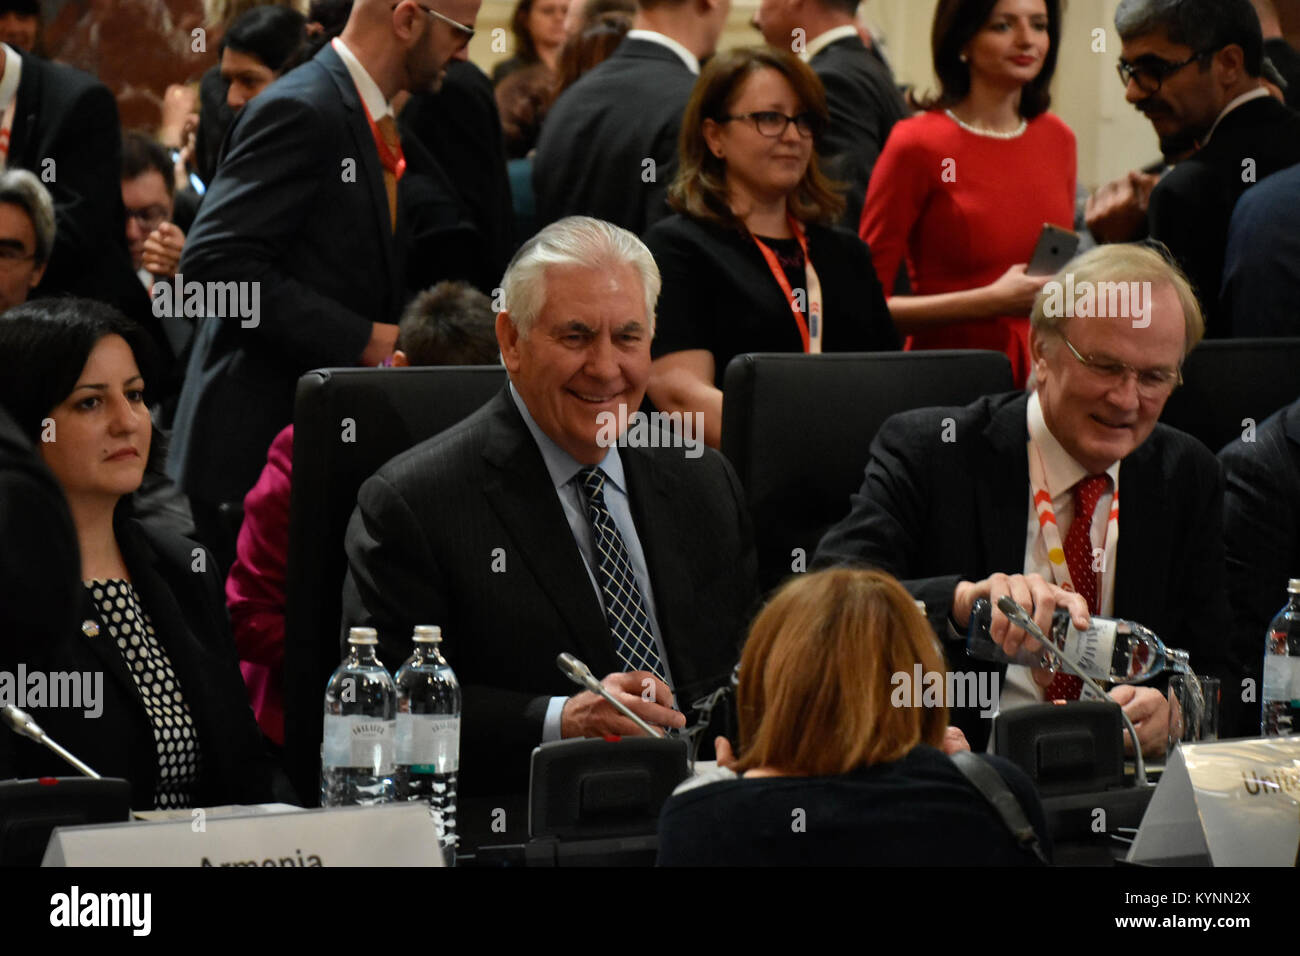 U.S. Secretary of State Rex Tillerson participates in the the 2017 Organization for Security and Co-operation in Europe (OSCE) Ministerial in Vienna, Austria on December 7, 2017. Stock Photo